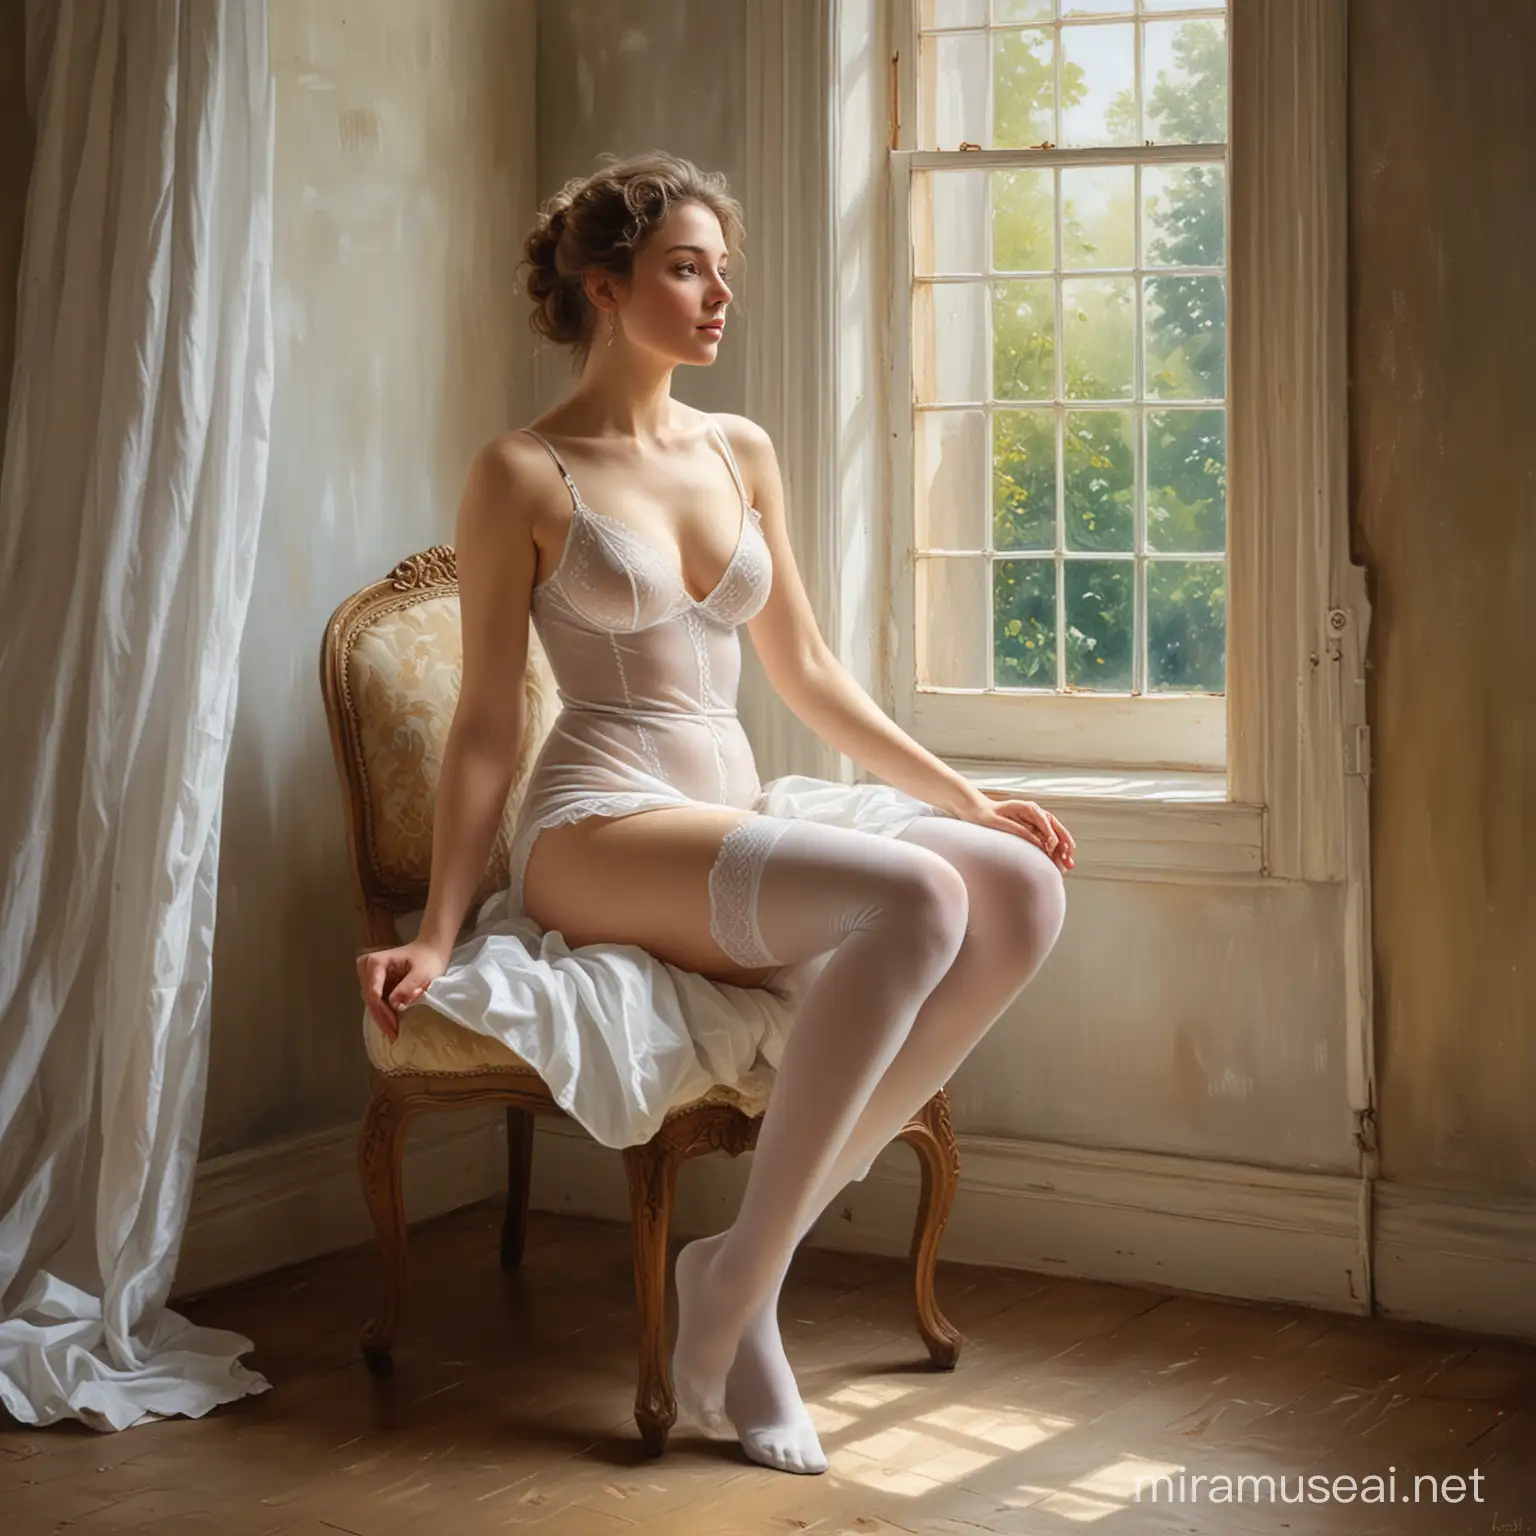 Stunning Nude Woman in White Stockings Poses by Window Oil Painting Inspired by Elisabeth Vigee Le Brun